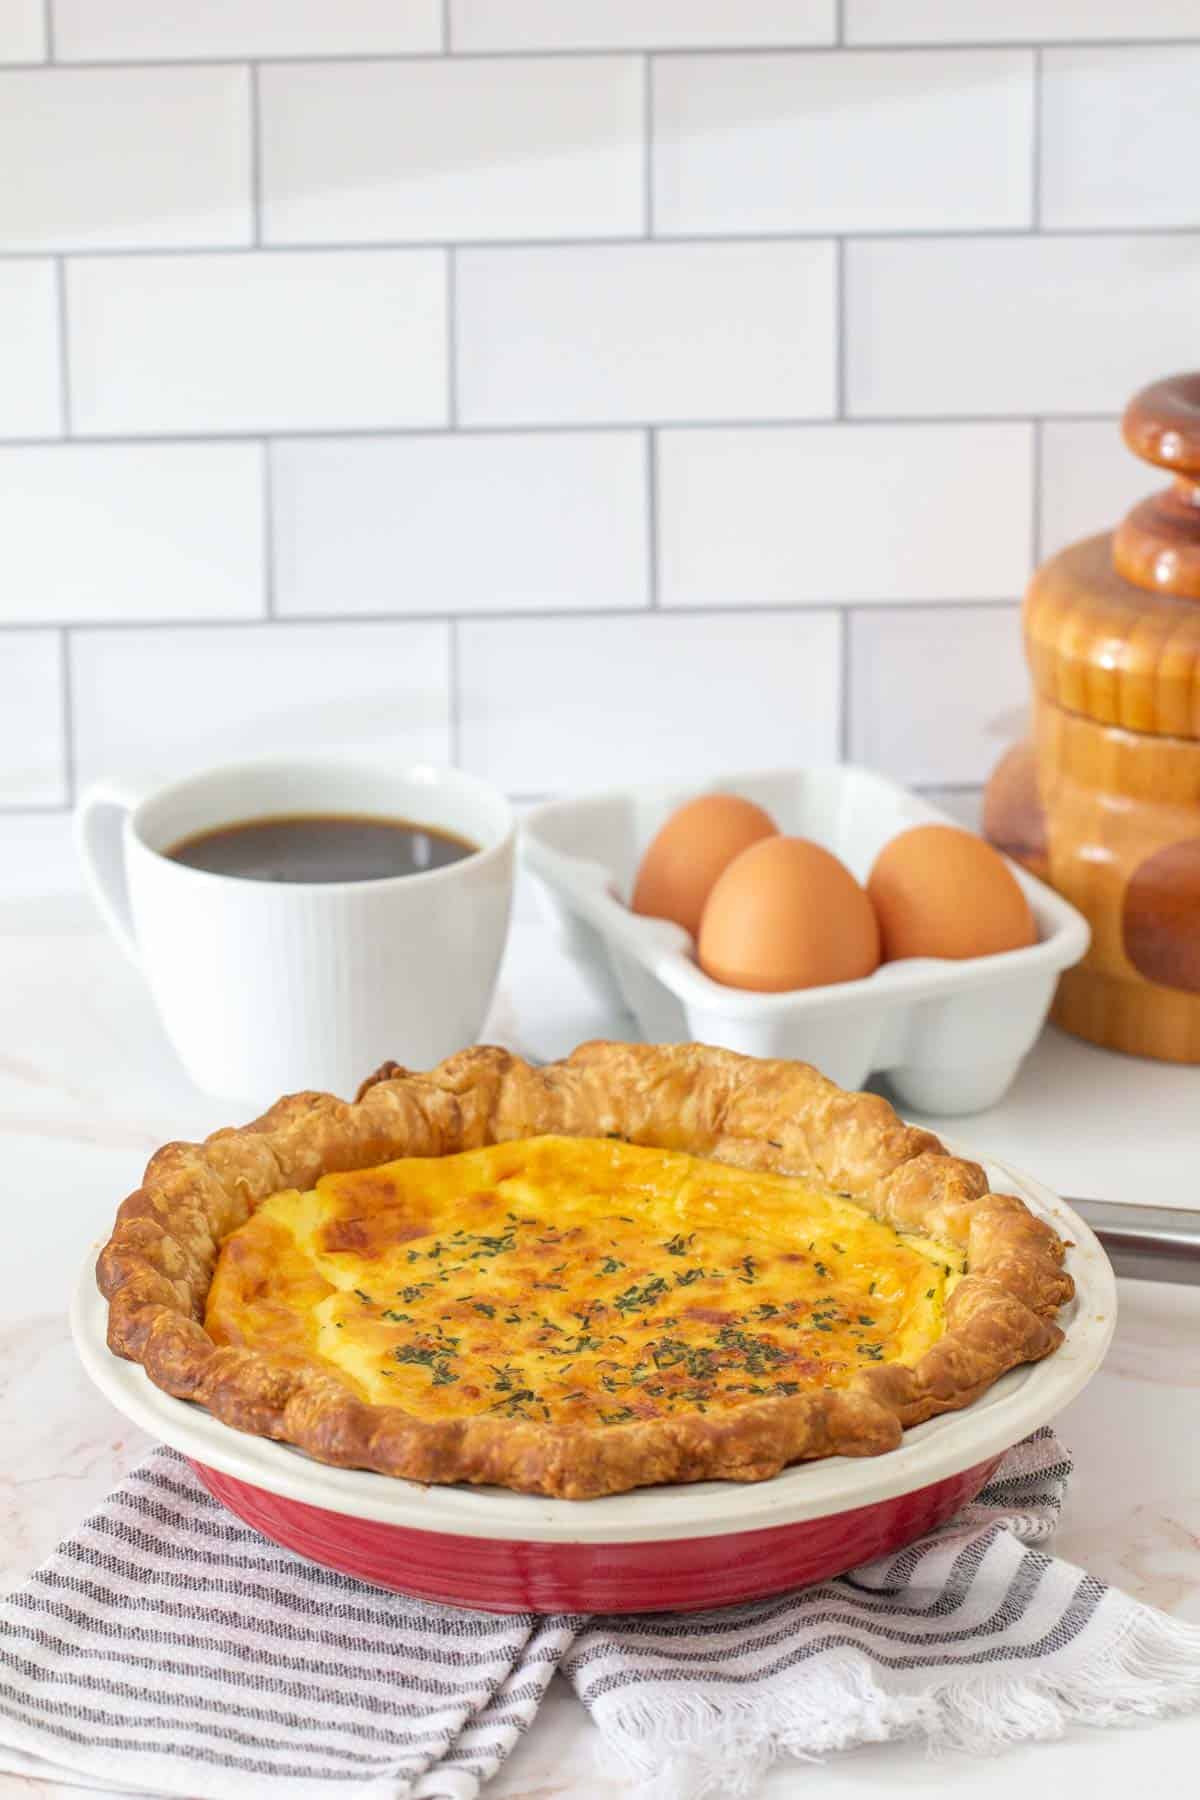 baked cheese quiche in red pie plate